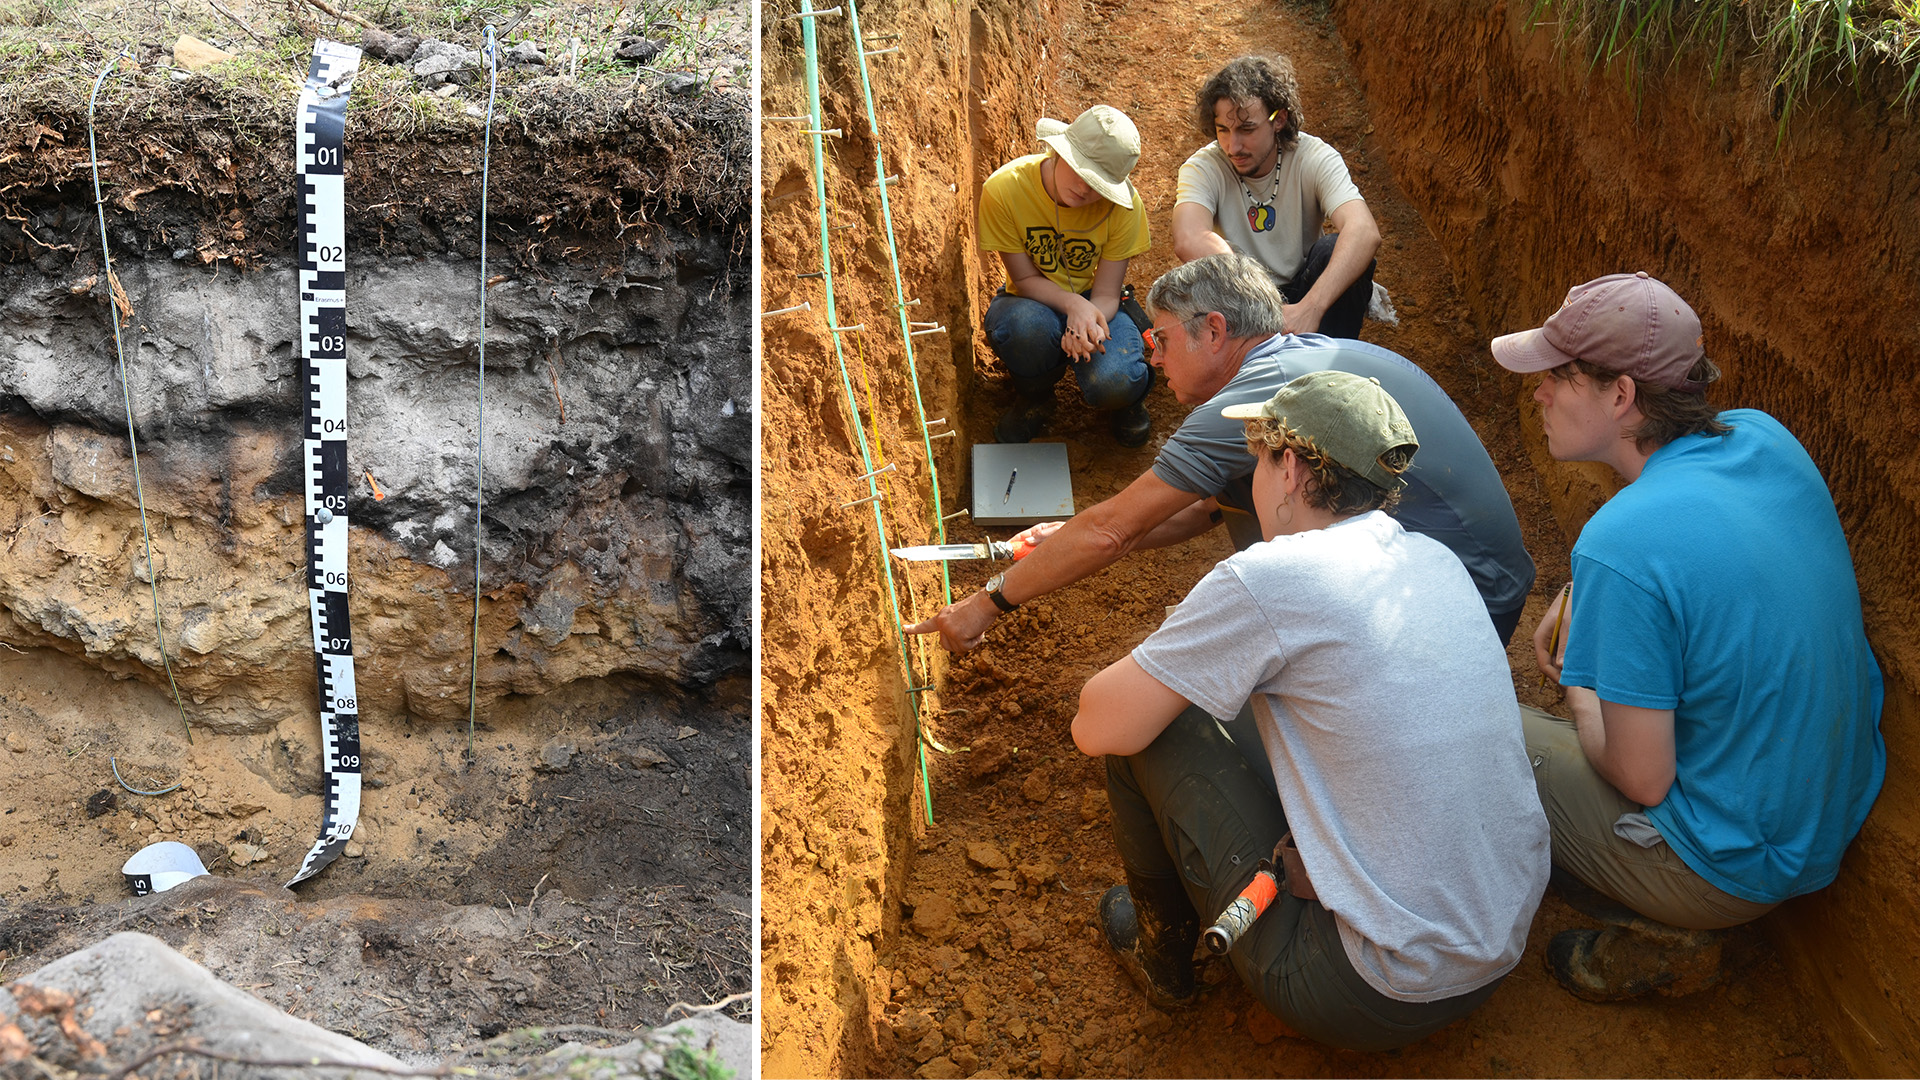 two imaged collaged together: on the left is a specialized soil measuring tape over a cross section of soil; on the right, five people kneel in a soil trench and examine a wall of soil together